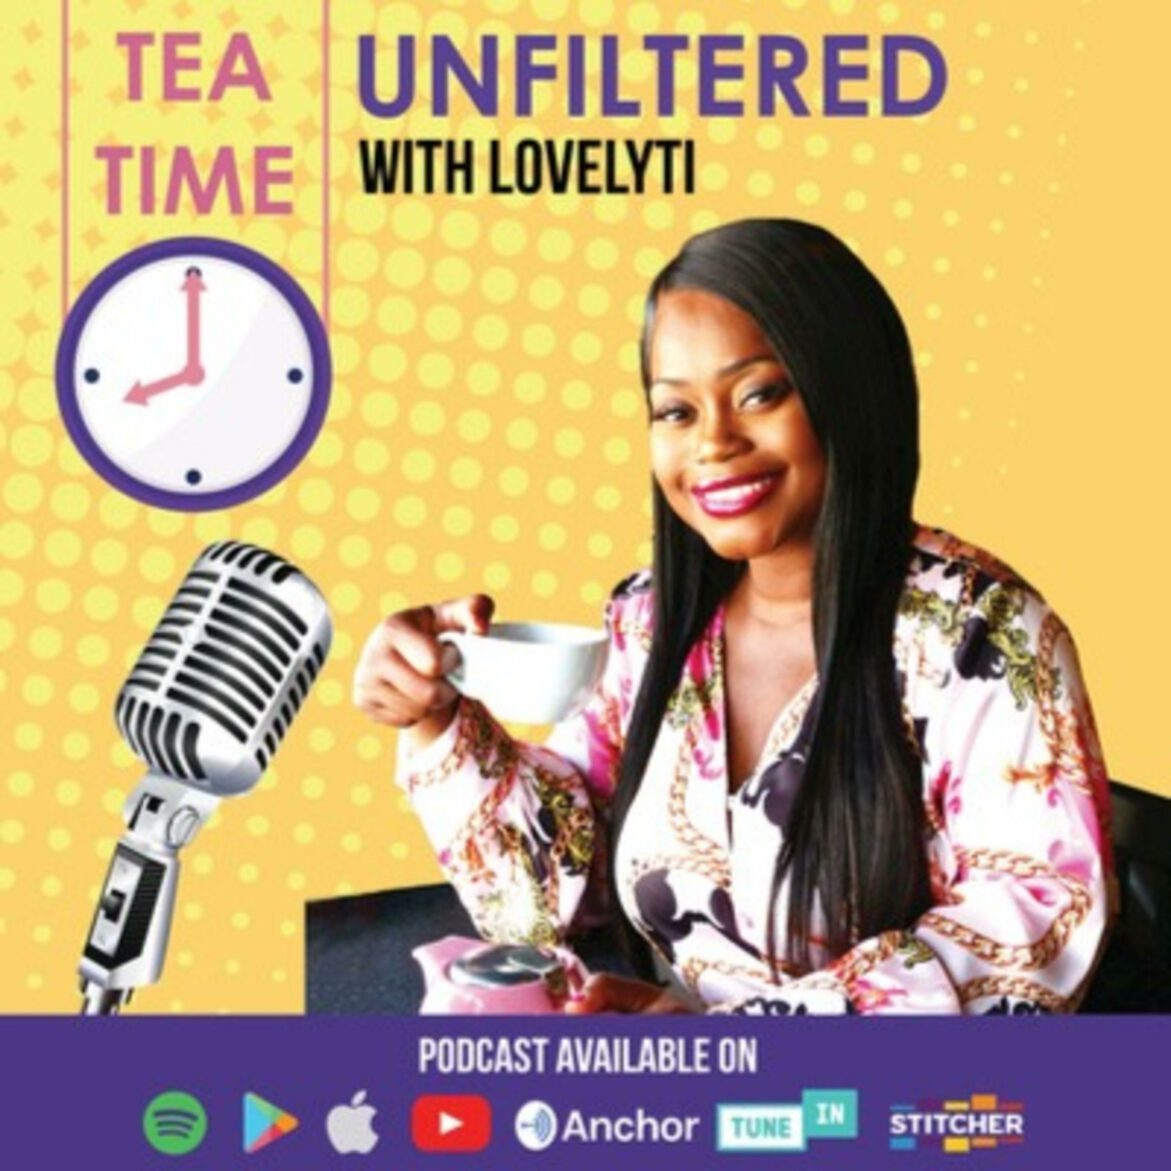 Black Podcasting - Pete Davidson in Trauma Therapy~Nurse charged in LA wreck~Angela Yee leaving TBC+ Emmett Till update